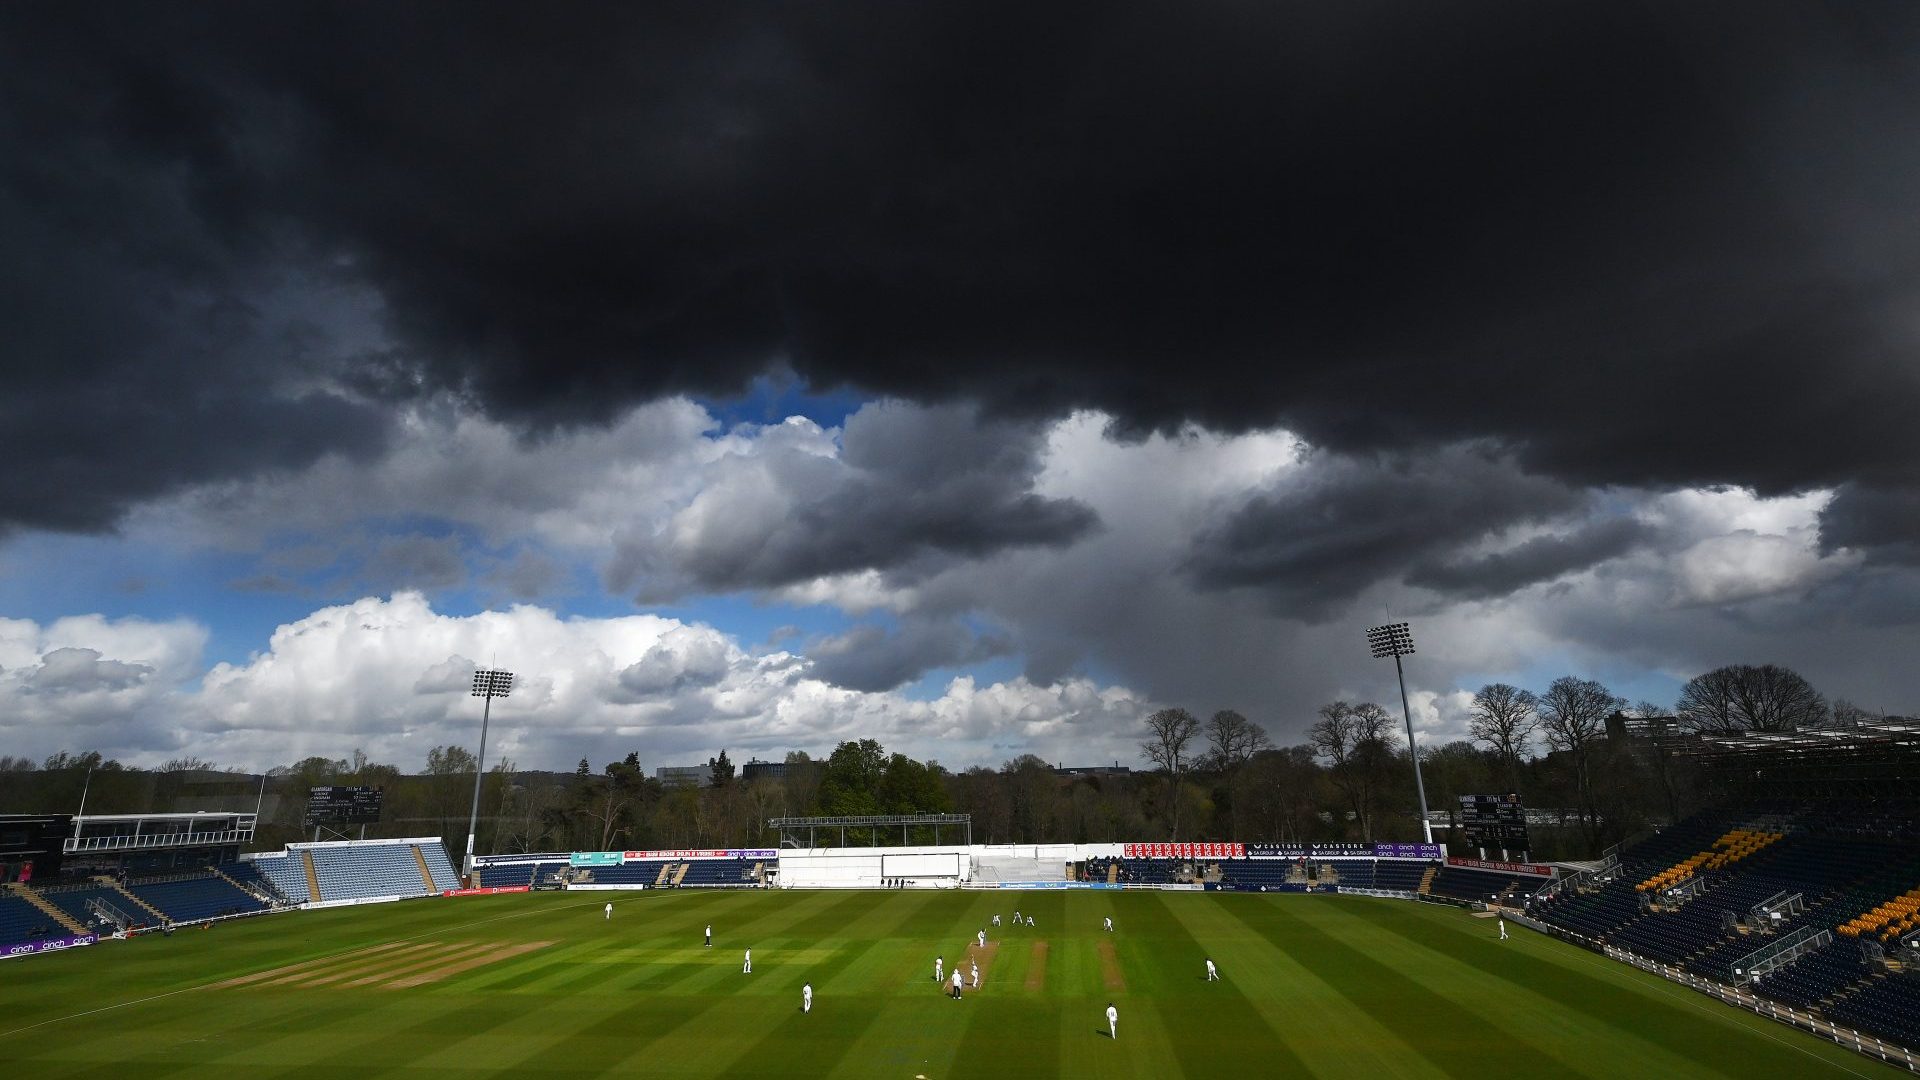 A raincloud passes over a county cricket match at Sophia Gardens in Cardiff. Photo: Dan Mullan/Getty